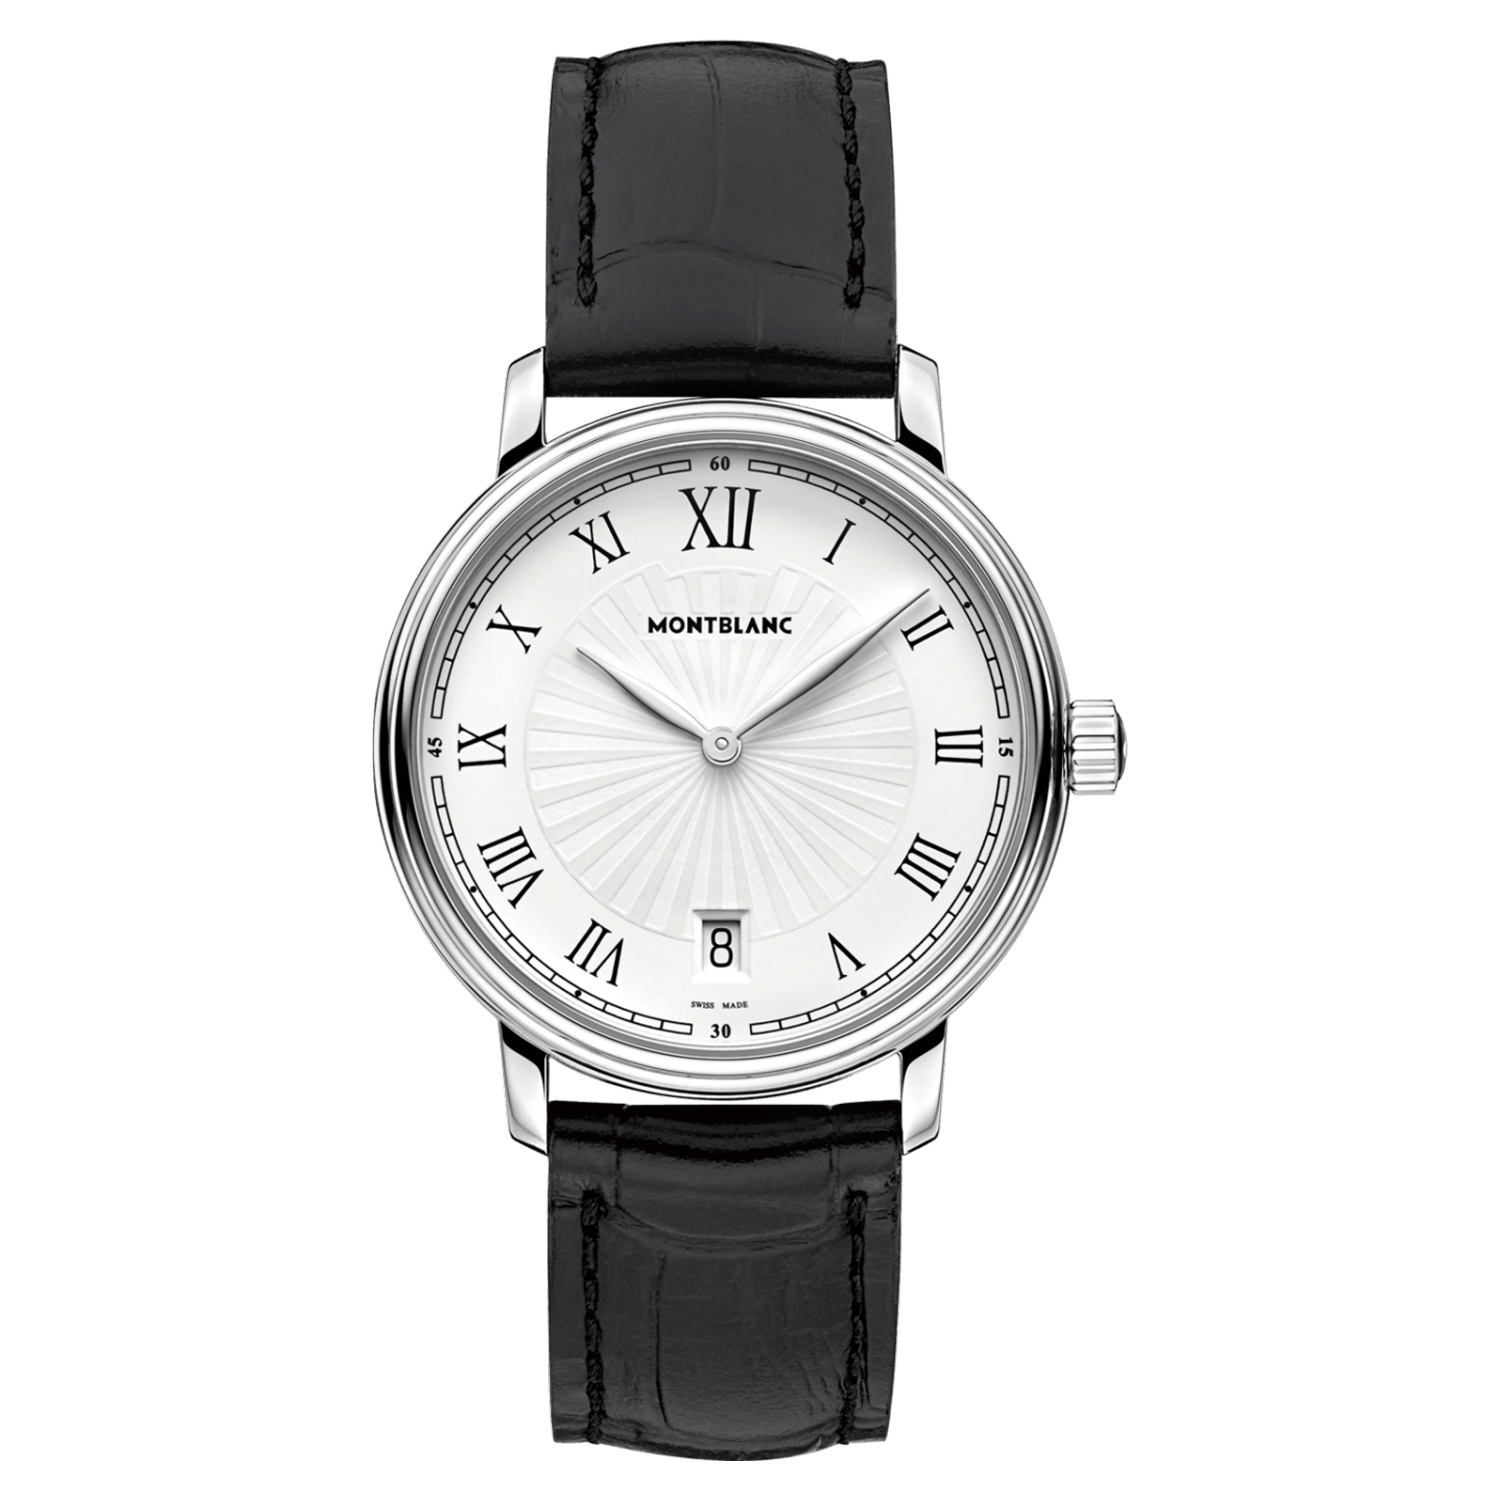 Montblanc Tradition Men's Watch 112635